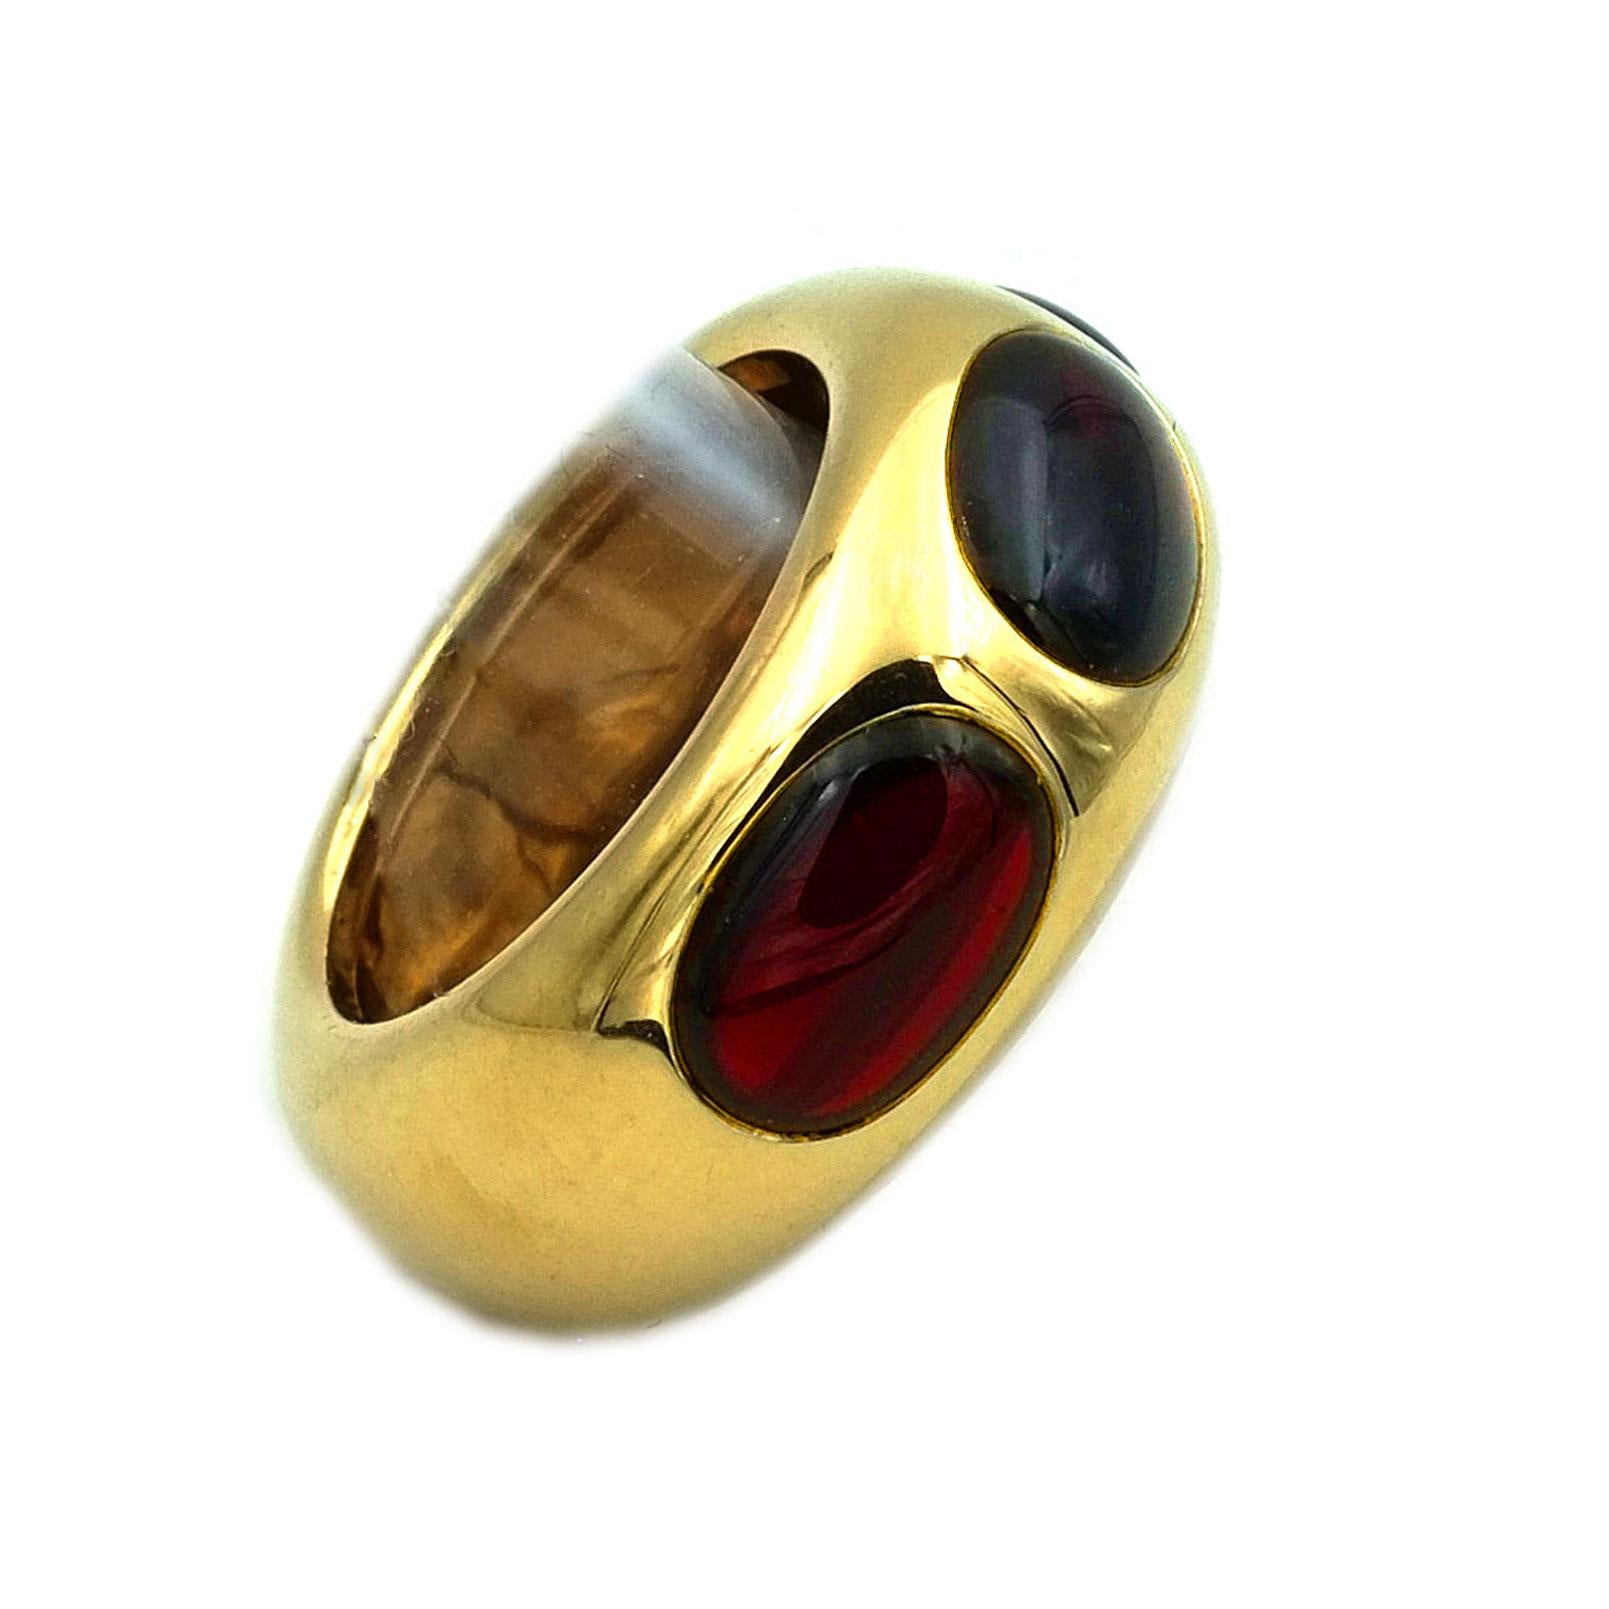 Pomellato 18K Yellow Gold Rubelite Cabochon Ring 

Sporty, elegant Pomellato gold ring as a solid band ring, set with three deep red rubelite cabochons.

Authentic goldsmith work from Pomellato in high-quality solid handwork made of fine 18-carat